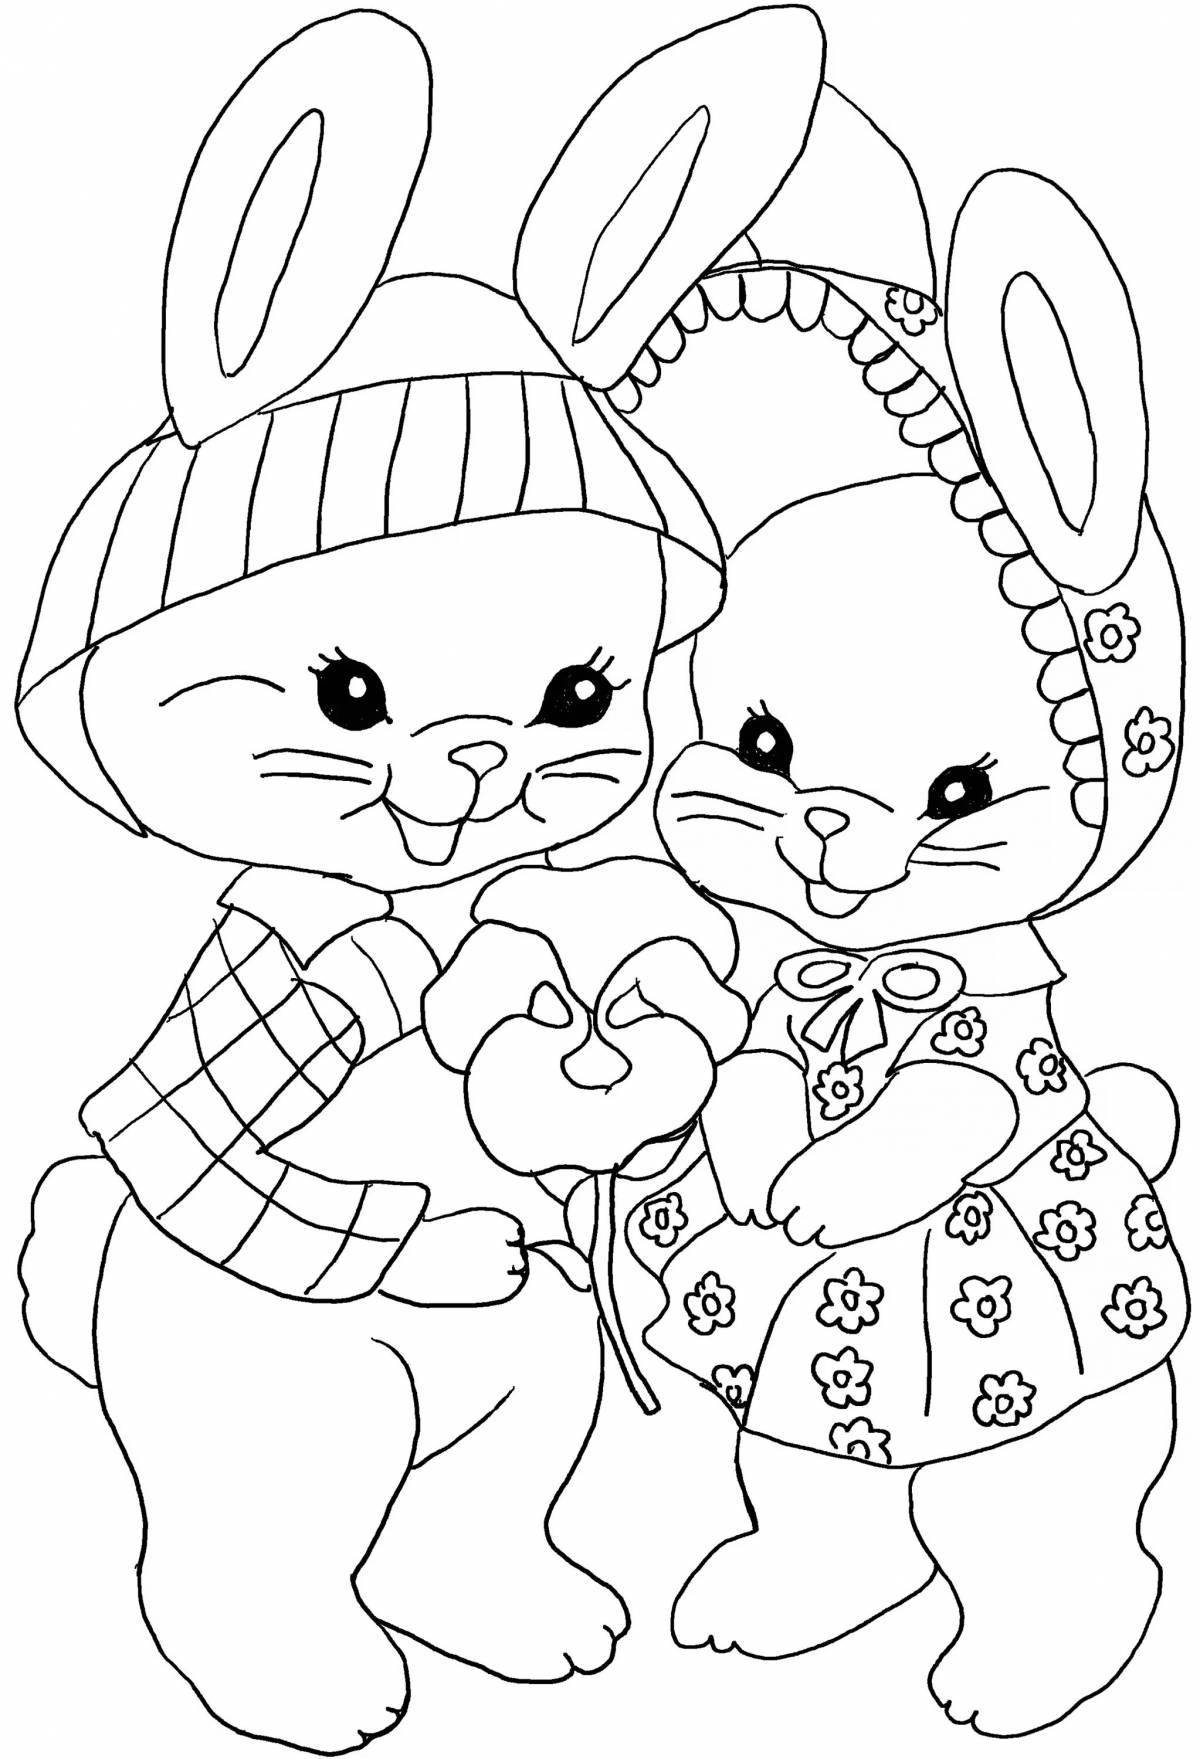 Colorful rabbit and cat coloring book